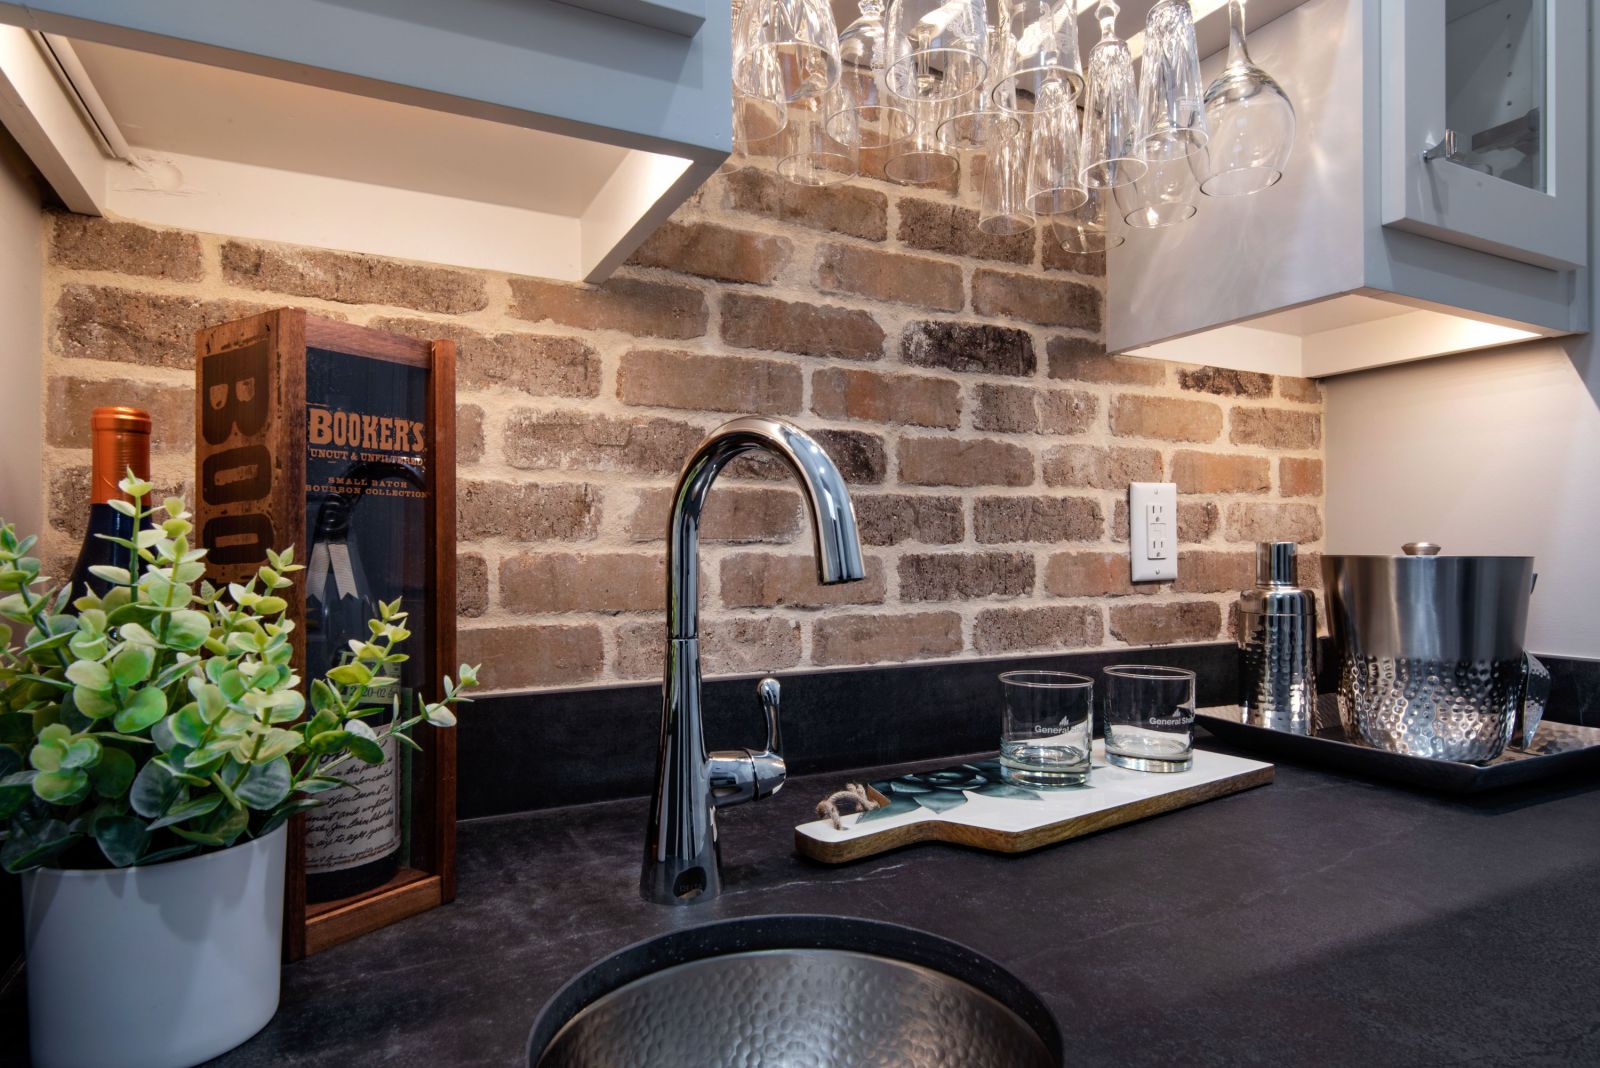 Kitchen sink with brick accent wall